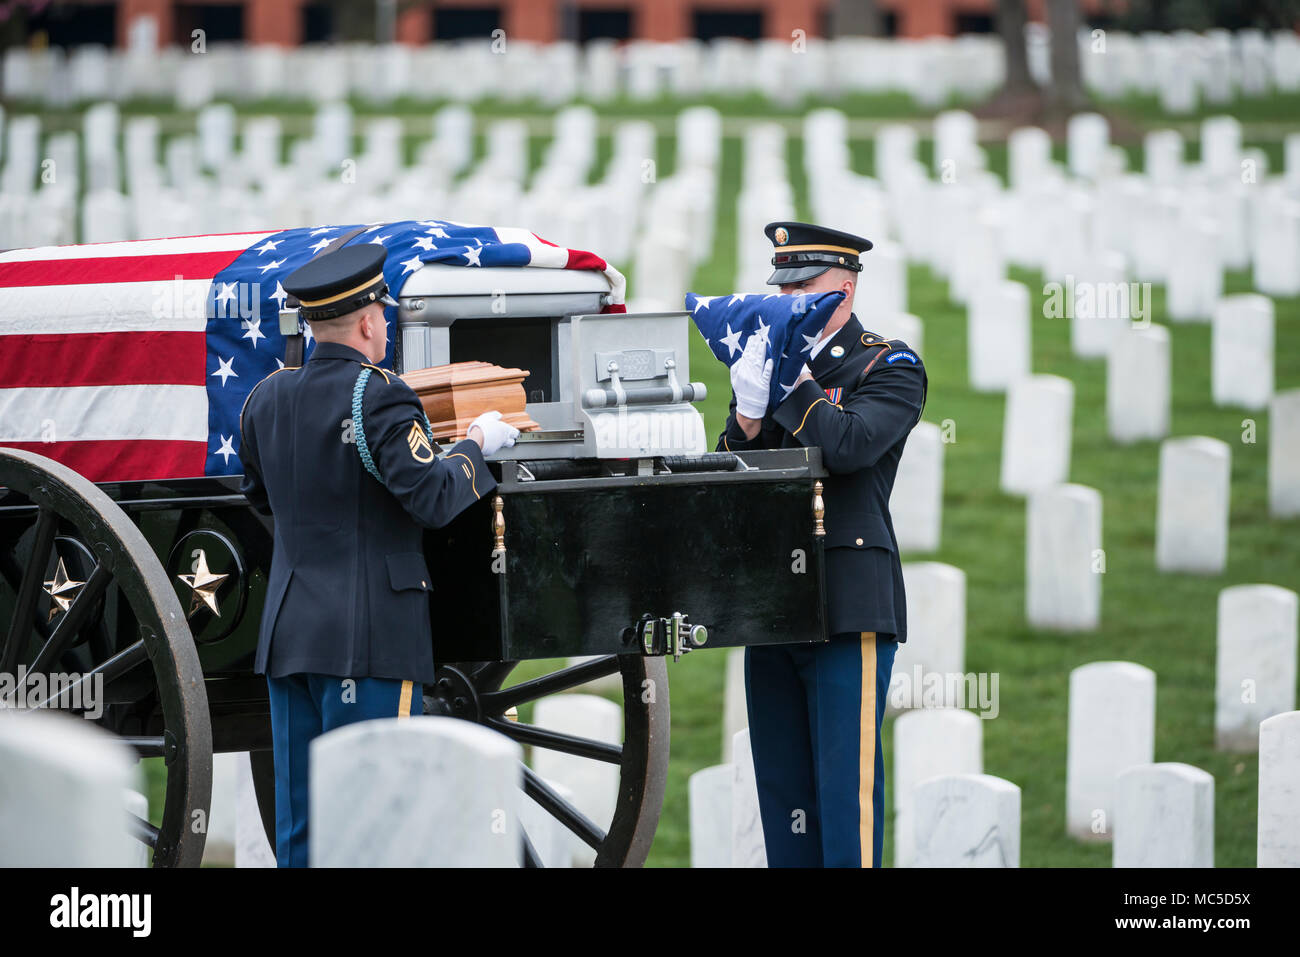 Members of The U.S. Army Honor Guard support the full honors funeral of U.S. Army Col. and Estonian Gen. Aleksander Einseln in Section 34 of Arlington National Cemetery, Arlington, Virginia, April 2, 2018.  Born in Estonia, Einseln immigrated to the United States in 1949 and enrolled in the U.S. Army in 1950 at the outbreak of the Korean War. He served with Special Forces in the Vietnam War and retiring as a Colonel in 1985. In 1993, Einseln returned to Estonia at the request of Estonian President Lennart Meri to serve as the first commander of the Estonian Defence Forces, holding this post un Stock Photo